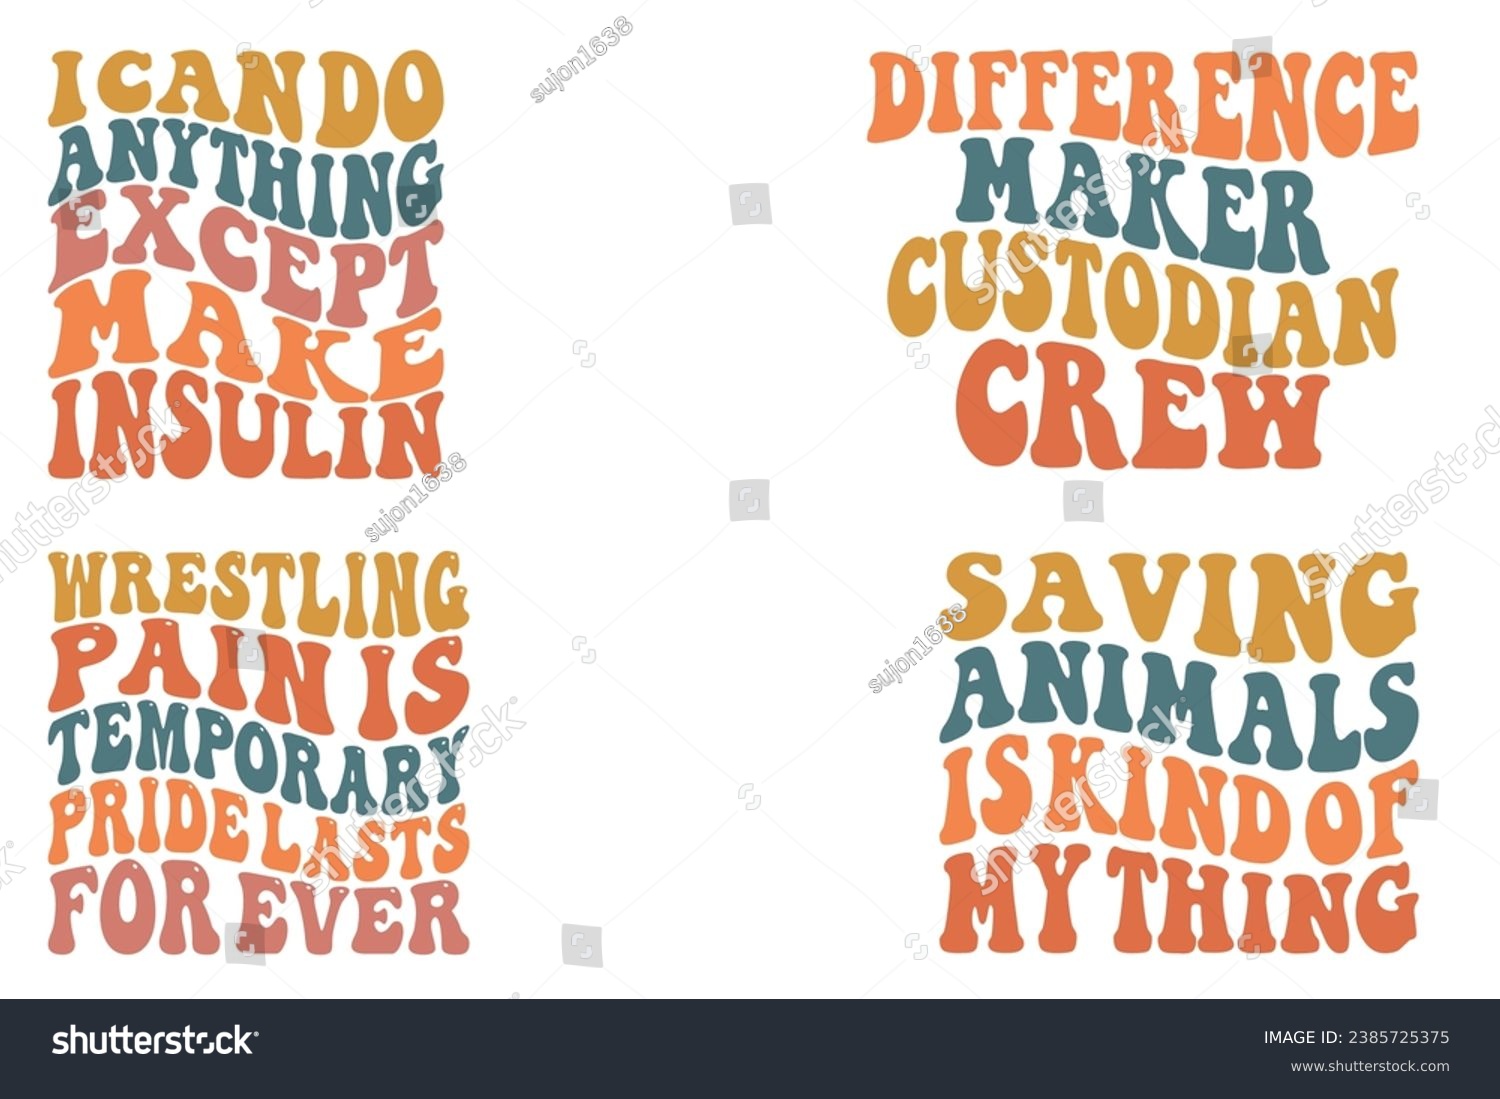 SVG of I Can Do Anything Except Make Insulin, Difference Maker Custodian Crew, wrestling pain is temporary pride lasts forever, Saving Animals Is Kind Of My Thing retro wavy t-shirt svg